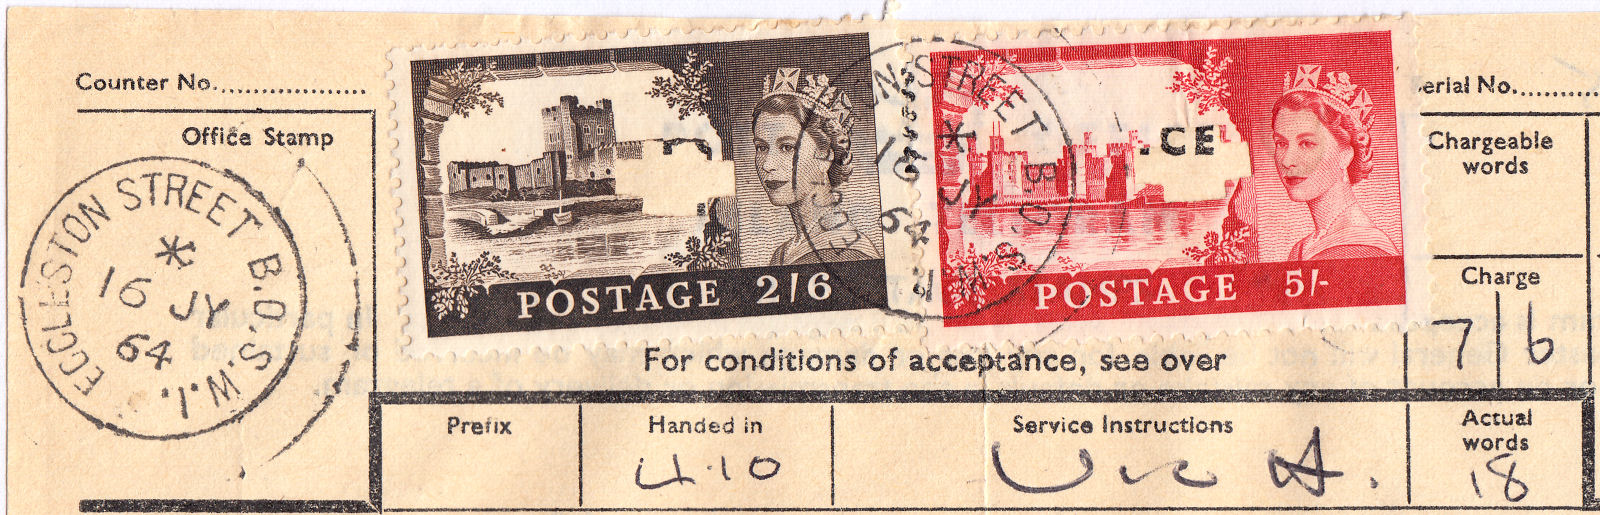 Clipped QEII stamps